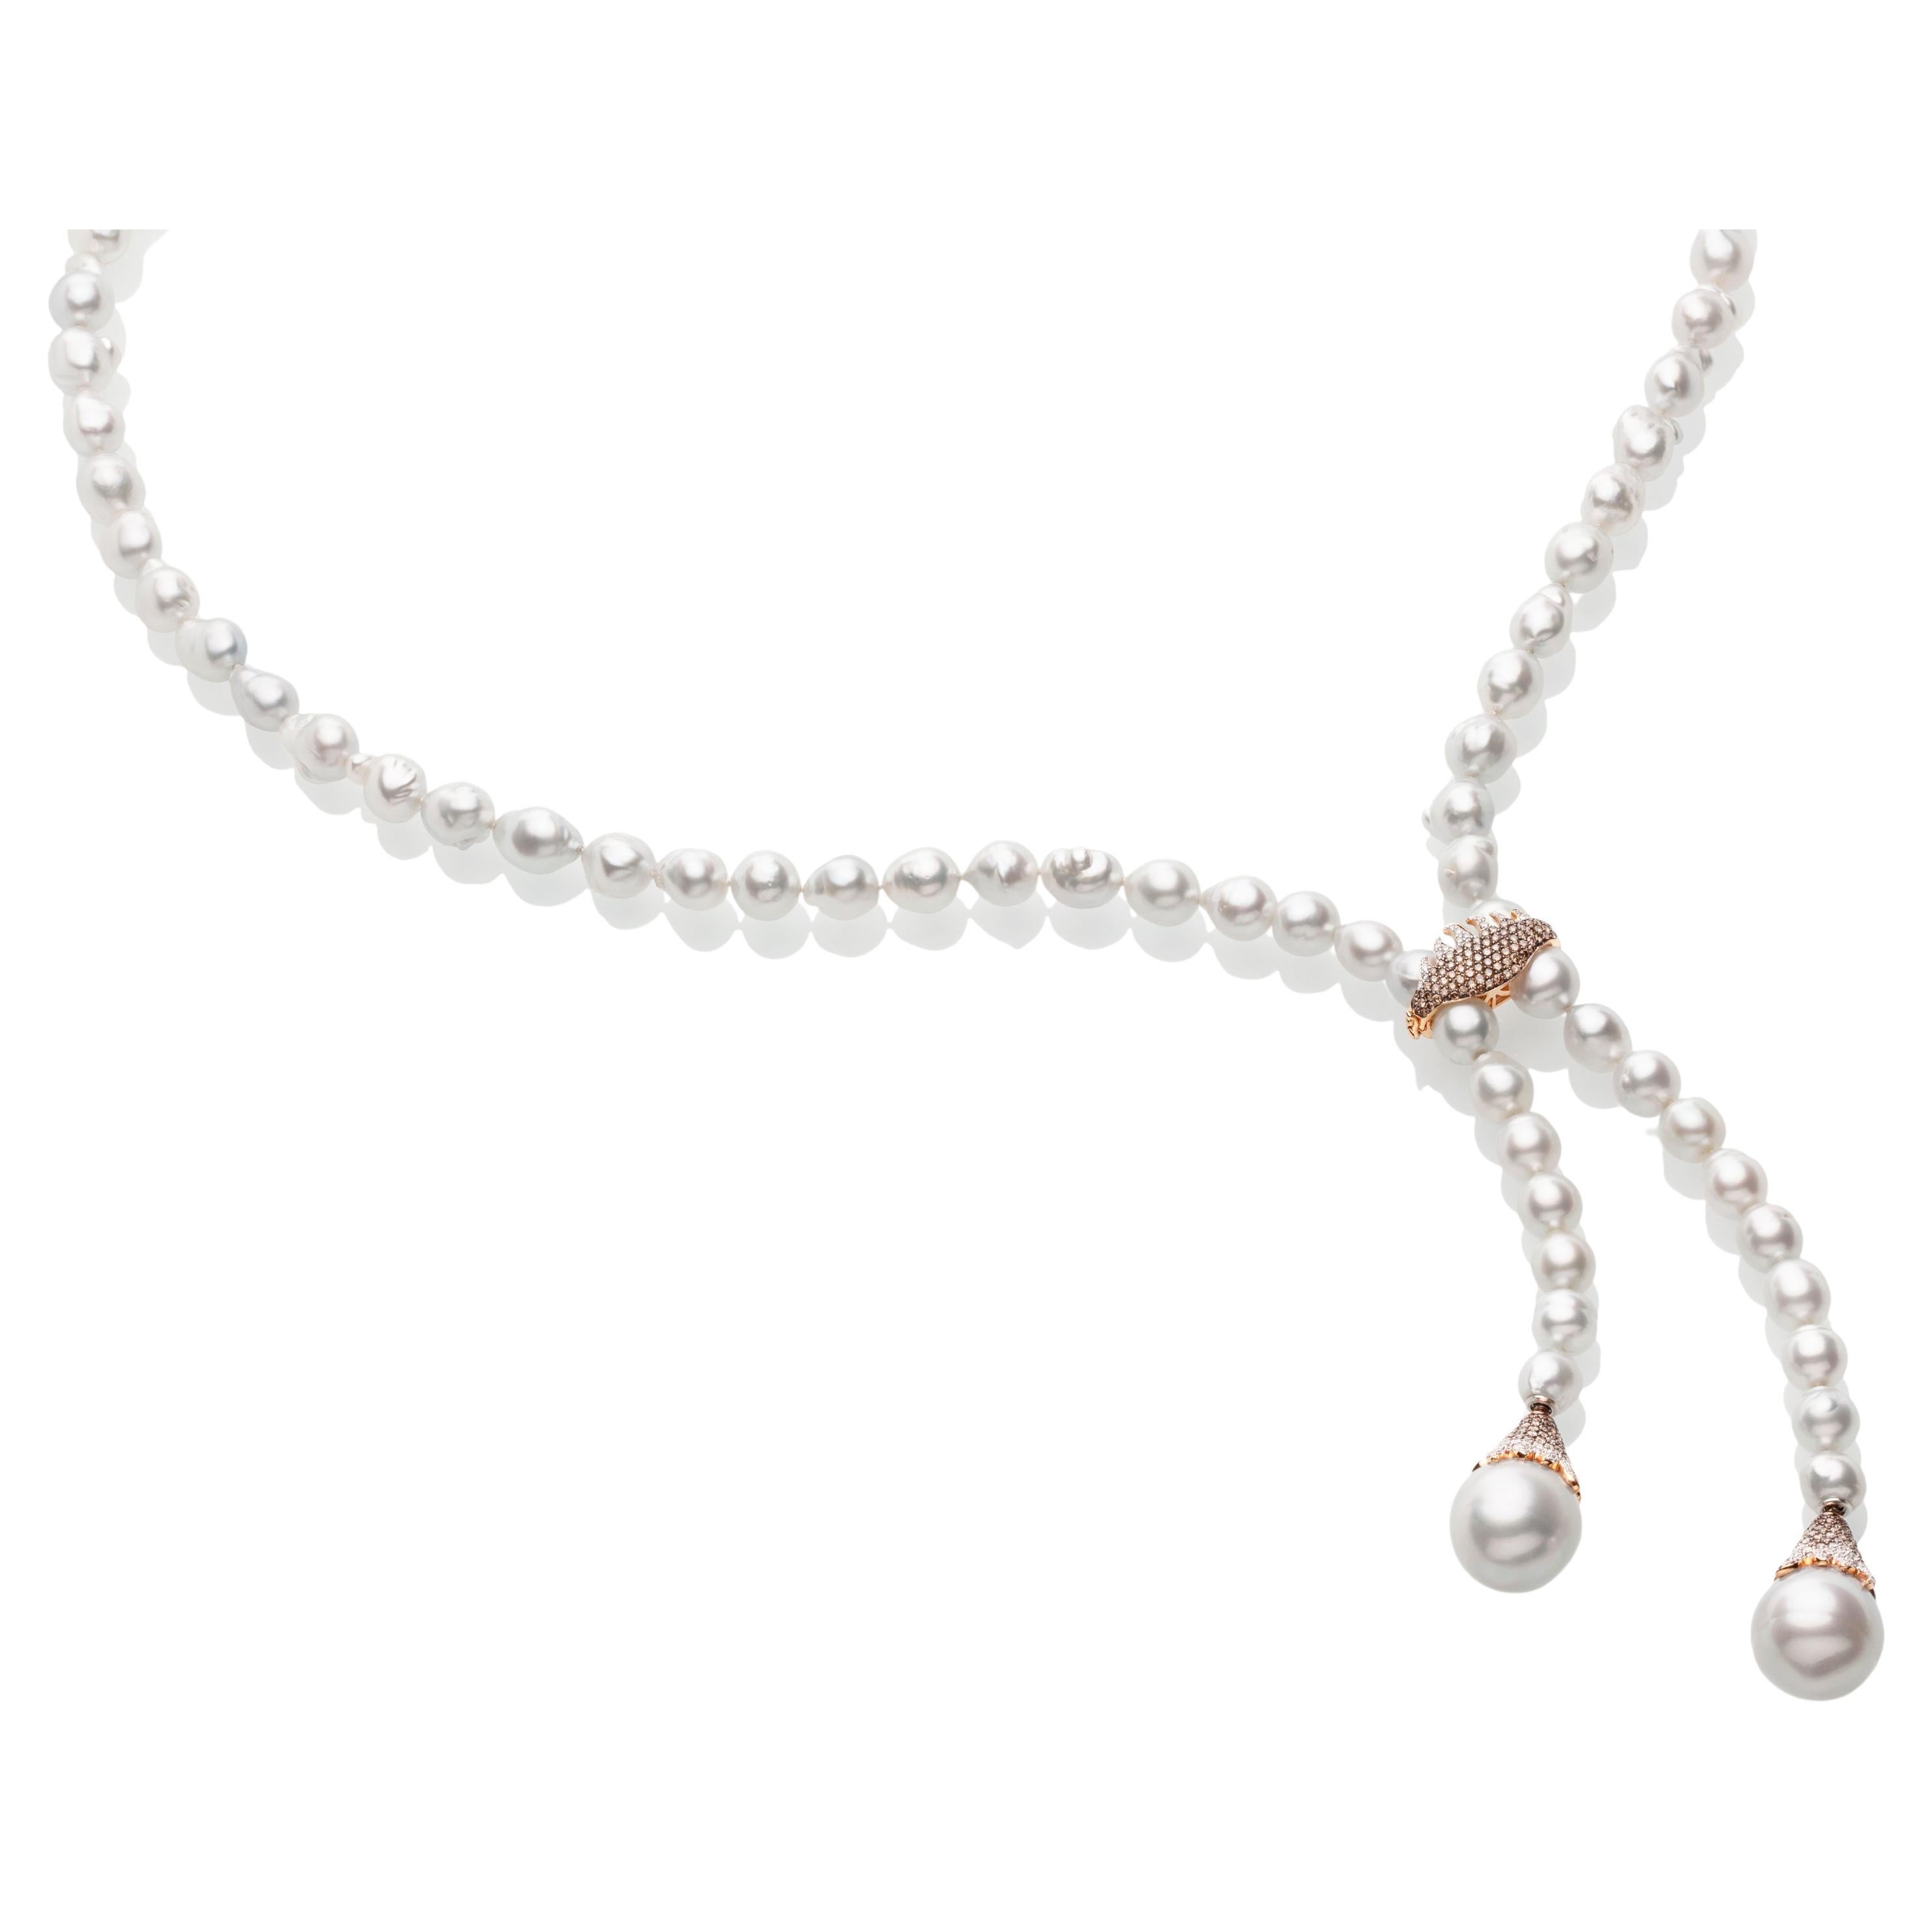 Hirsh South Sea Pearl and Diamond Necklace